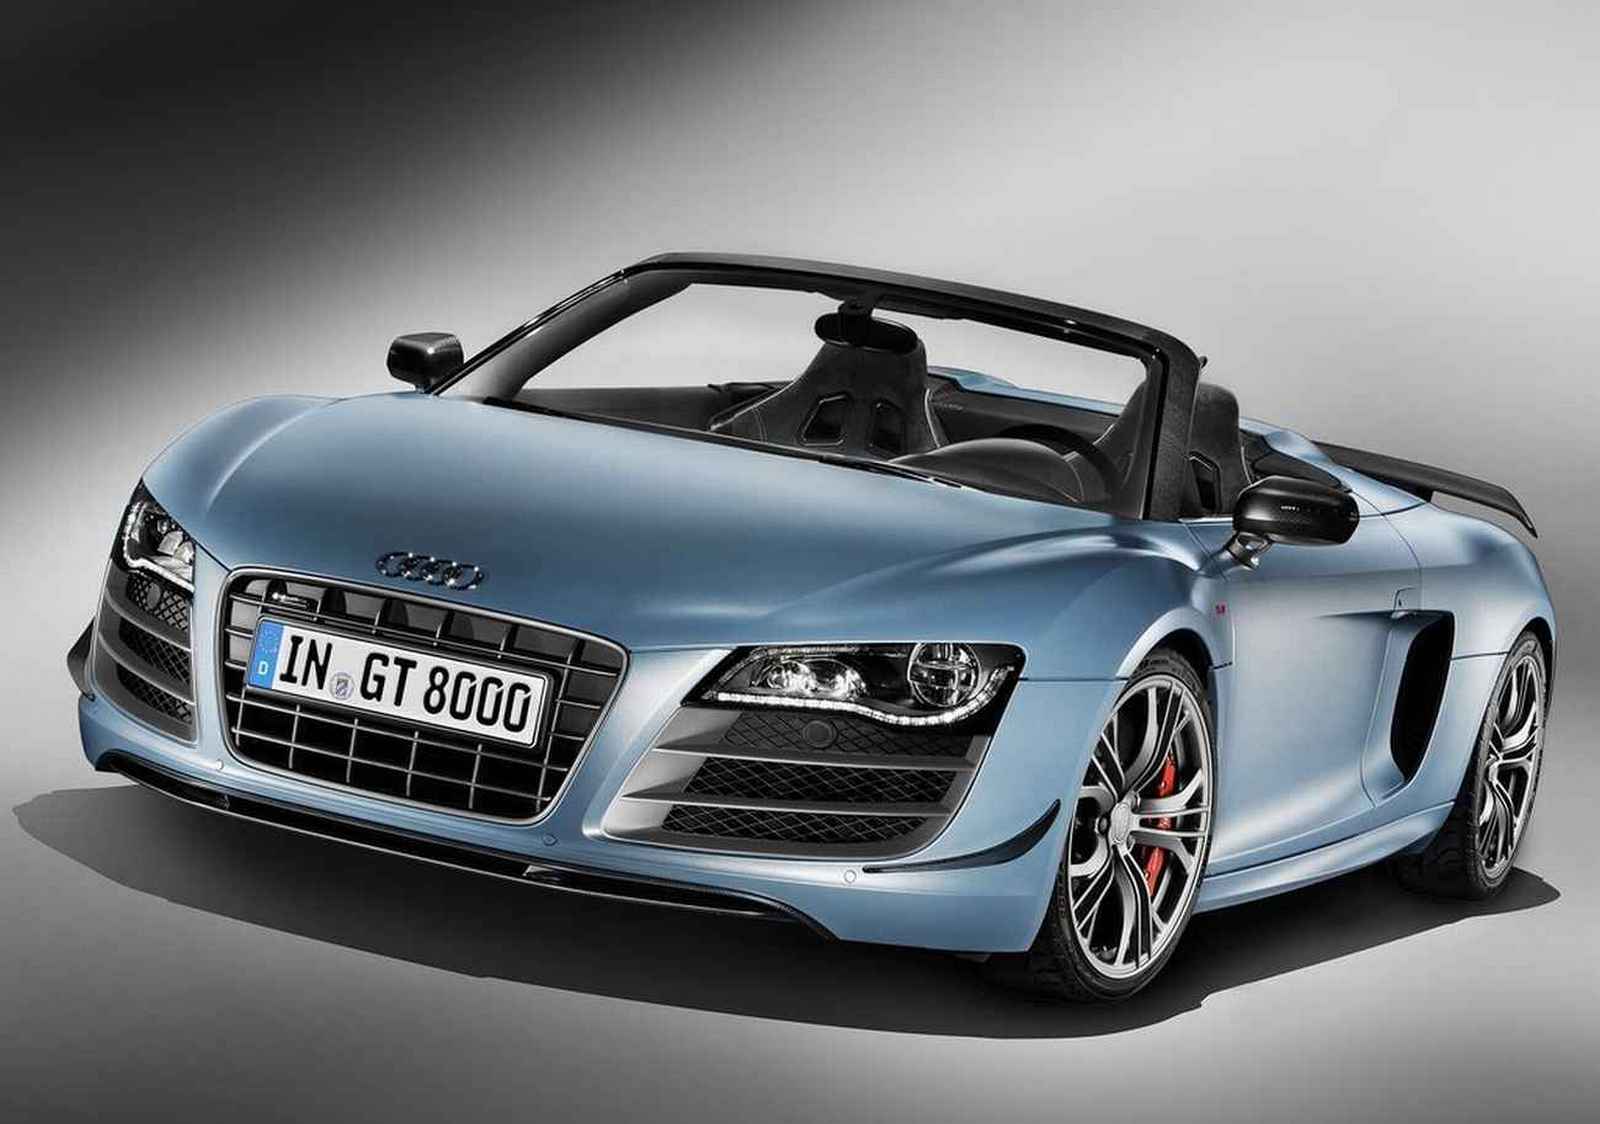 Audi R8 Wallpaper Blue 5990 Hd Wallpapers in Cars   Imagescicom